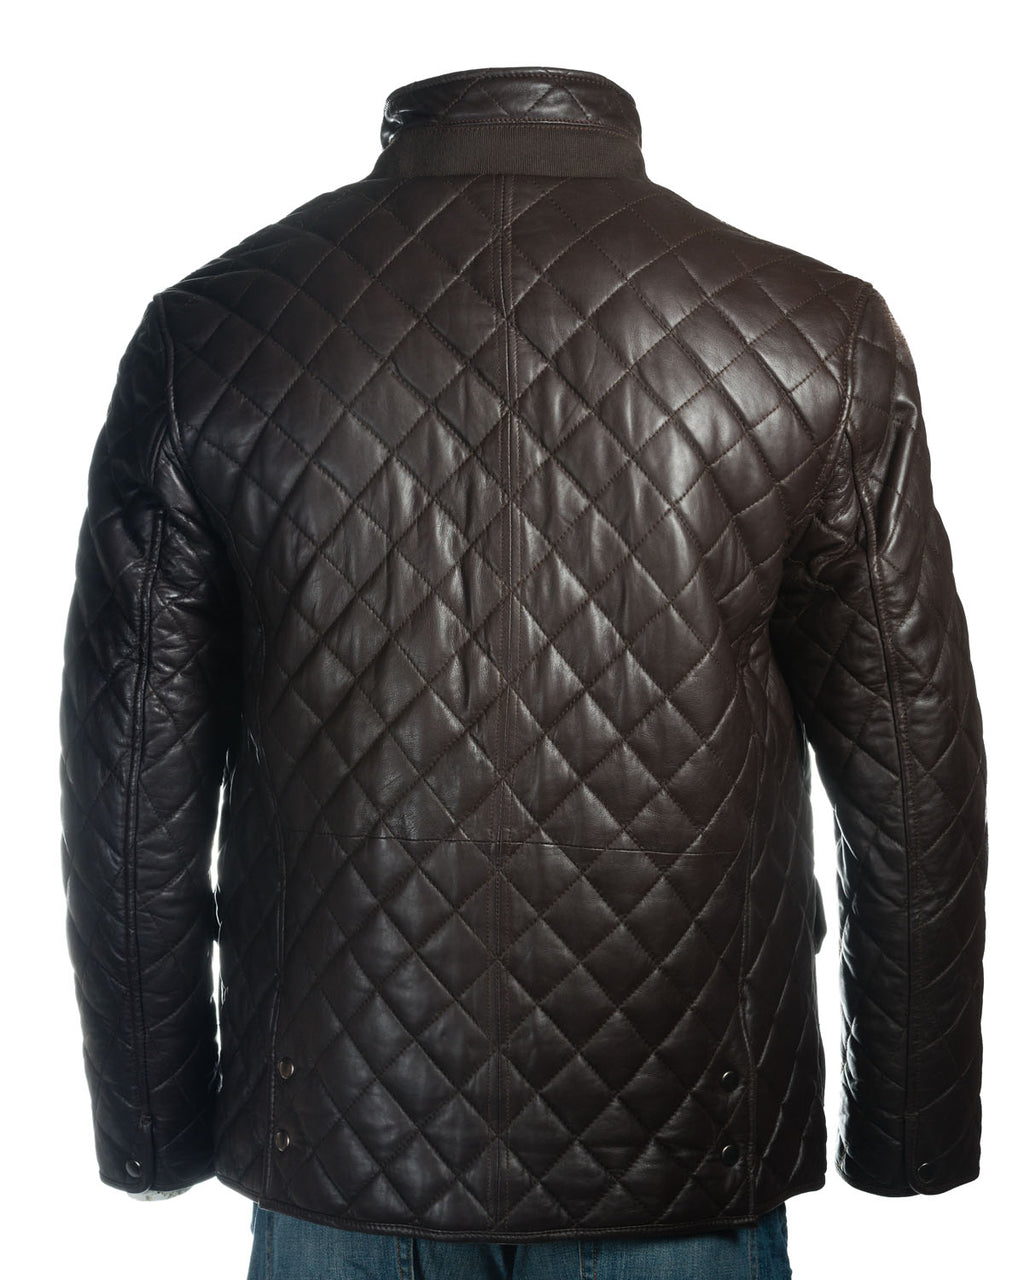 Men's Brown Quilted Leather Coat with Diamond Stitch - Javier